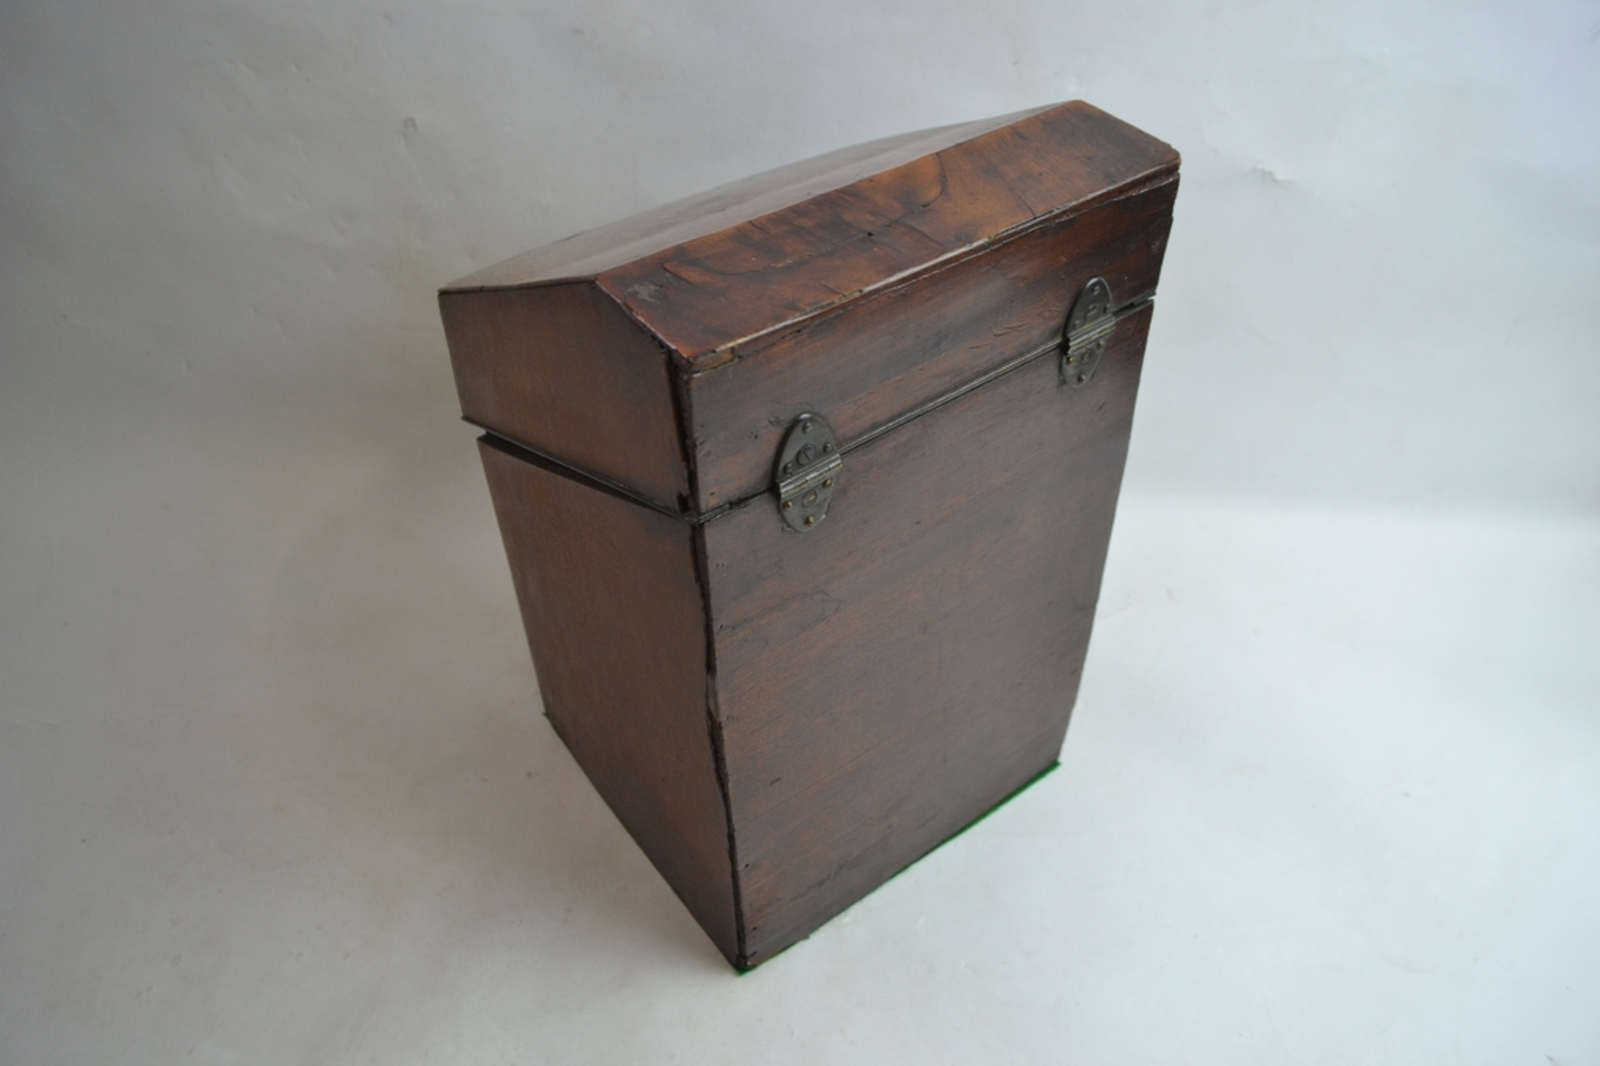 18th century cutlery box converted to wine box